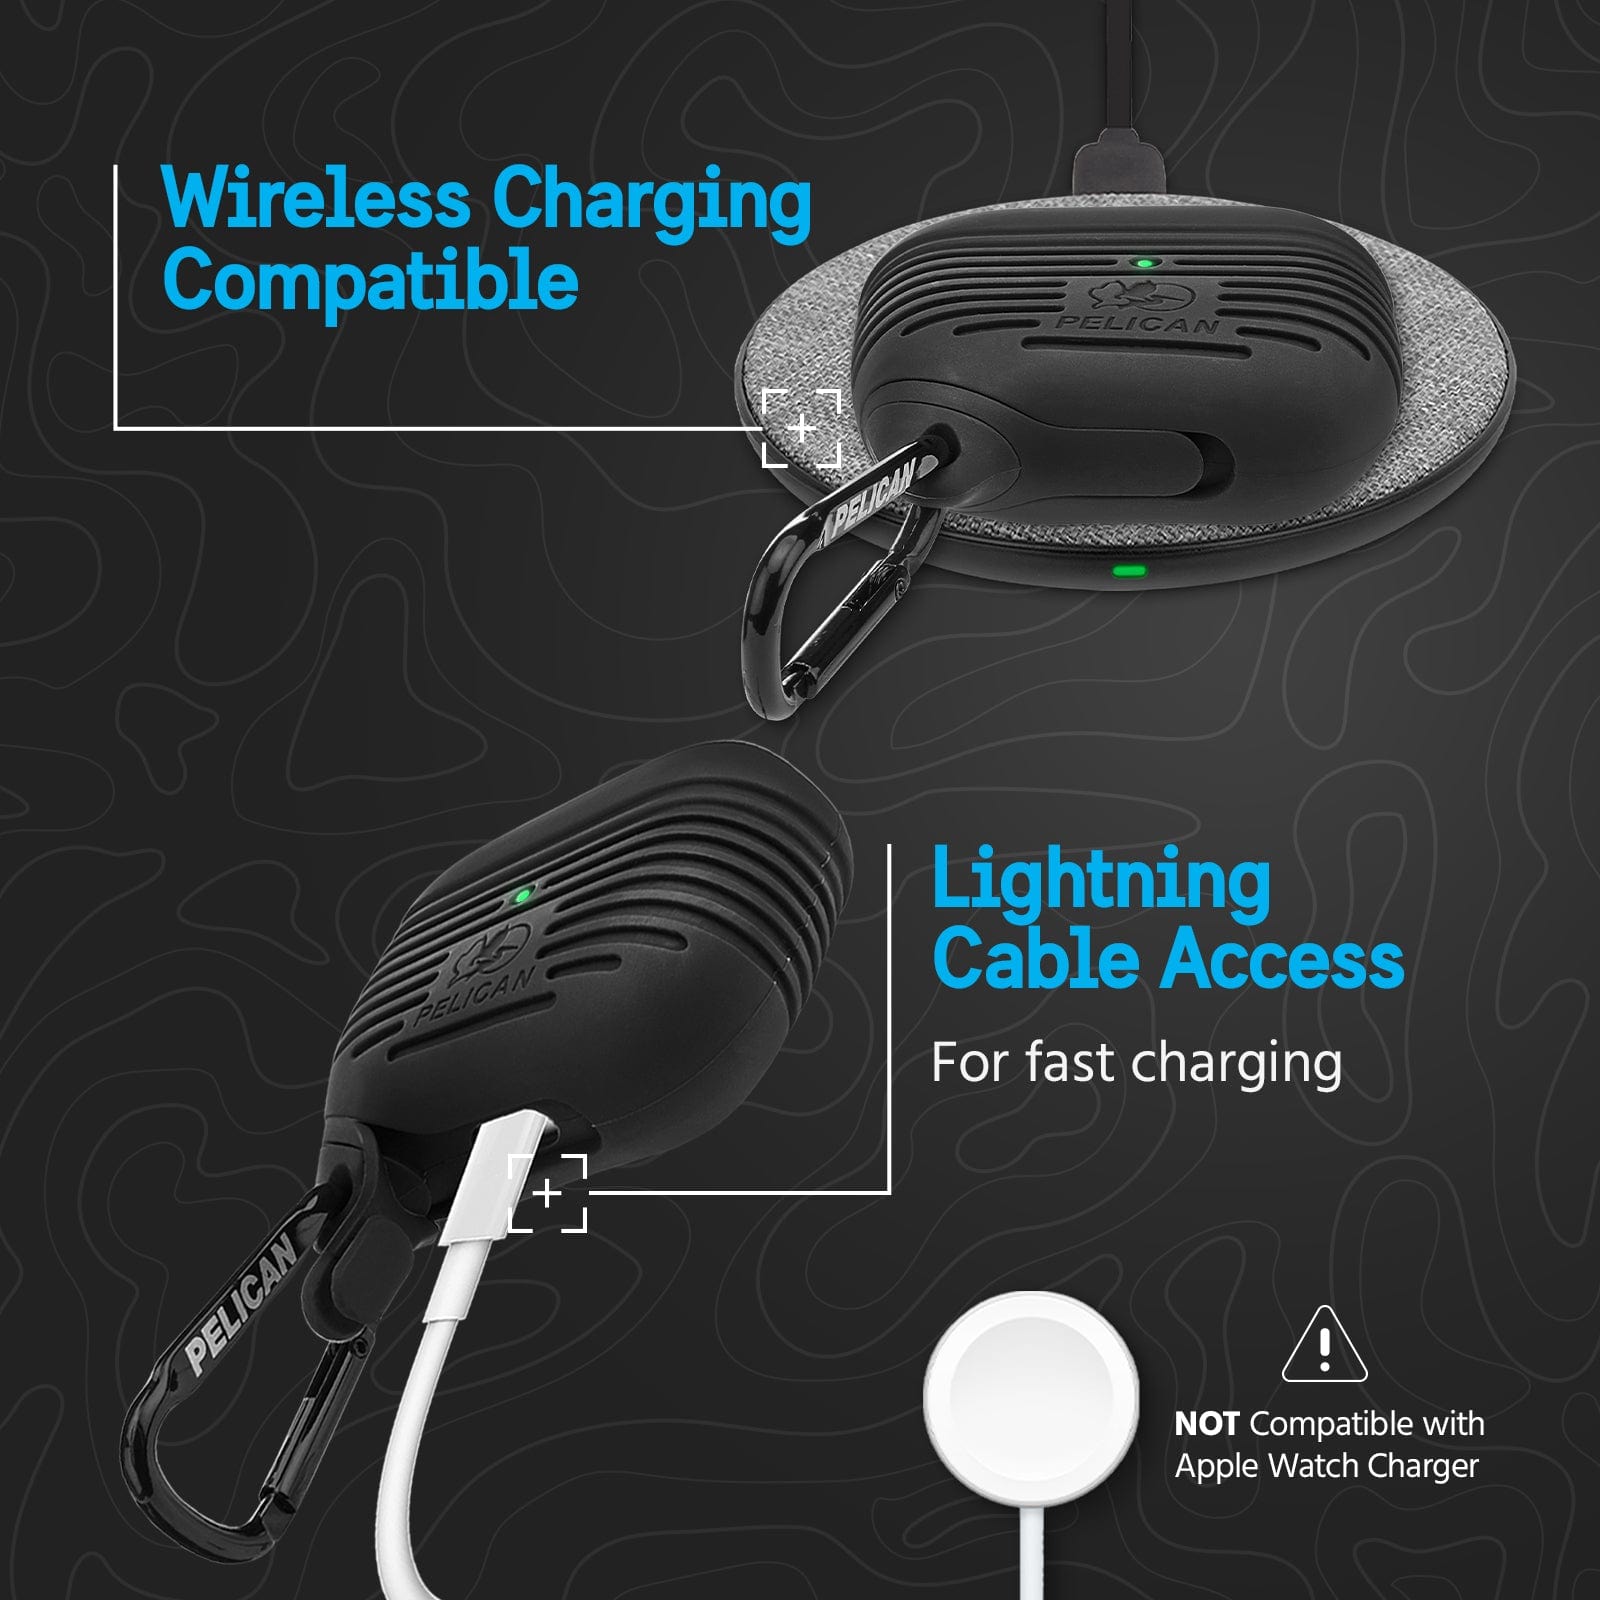 WIRRELESS CHARGING COMPATIBLE. LIGHTNING CABLE ACCESS FOR FAST CHARGING.